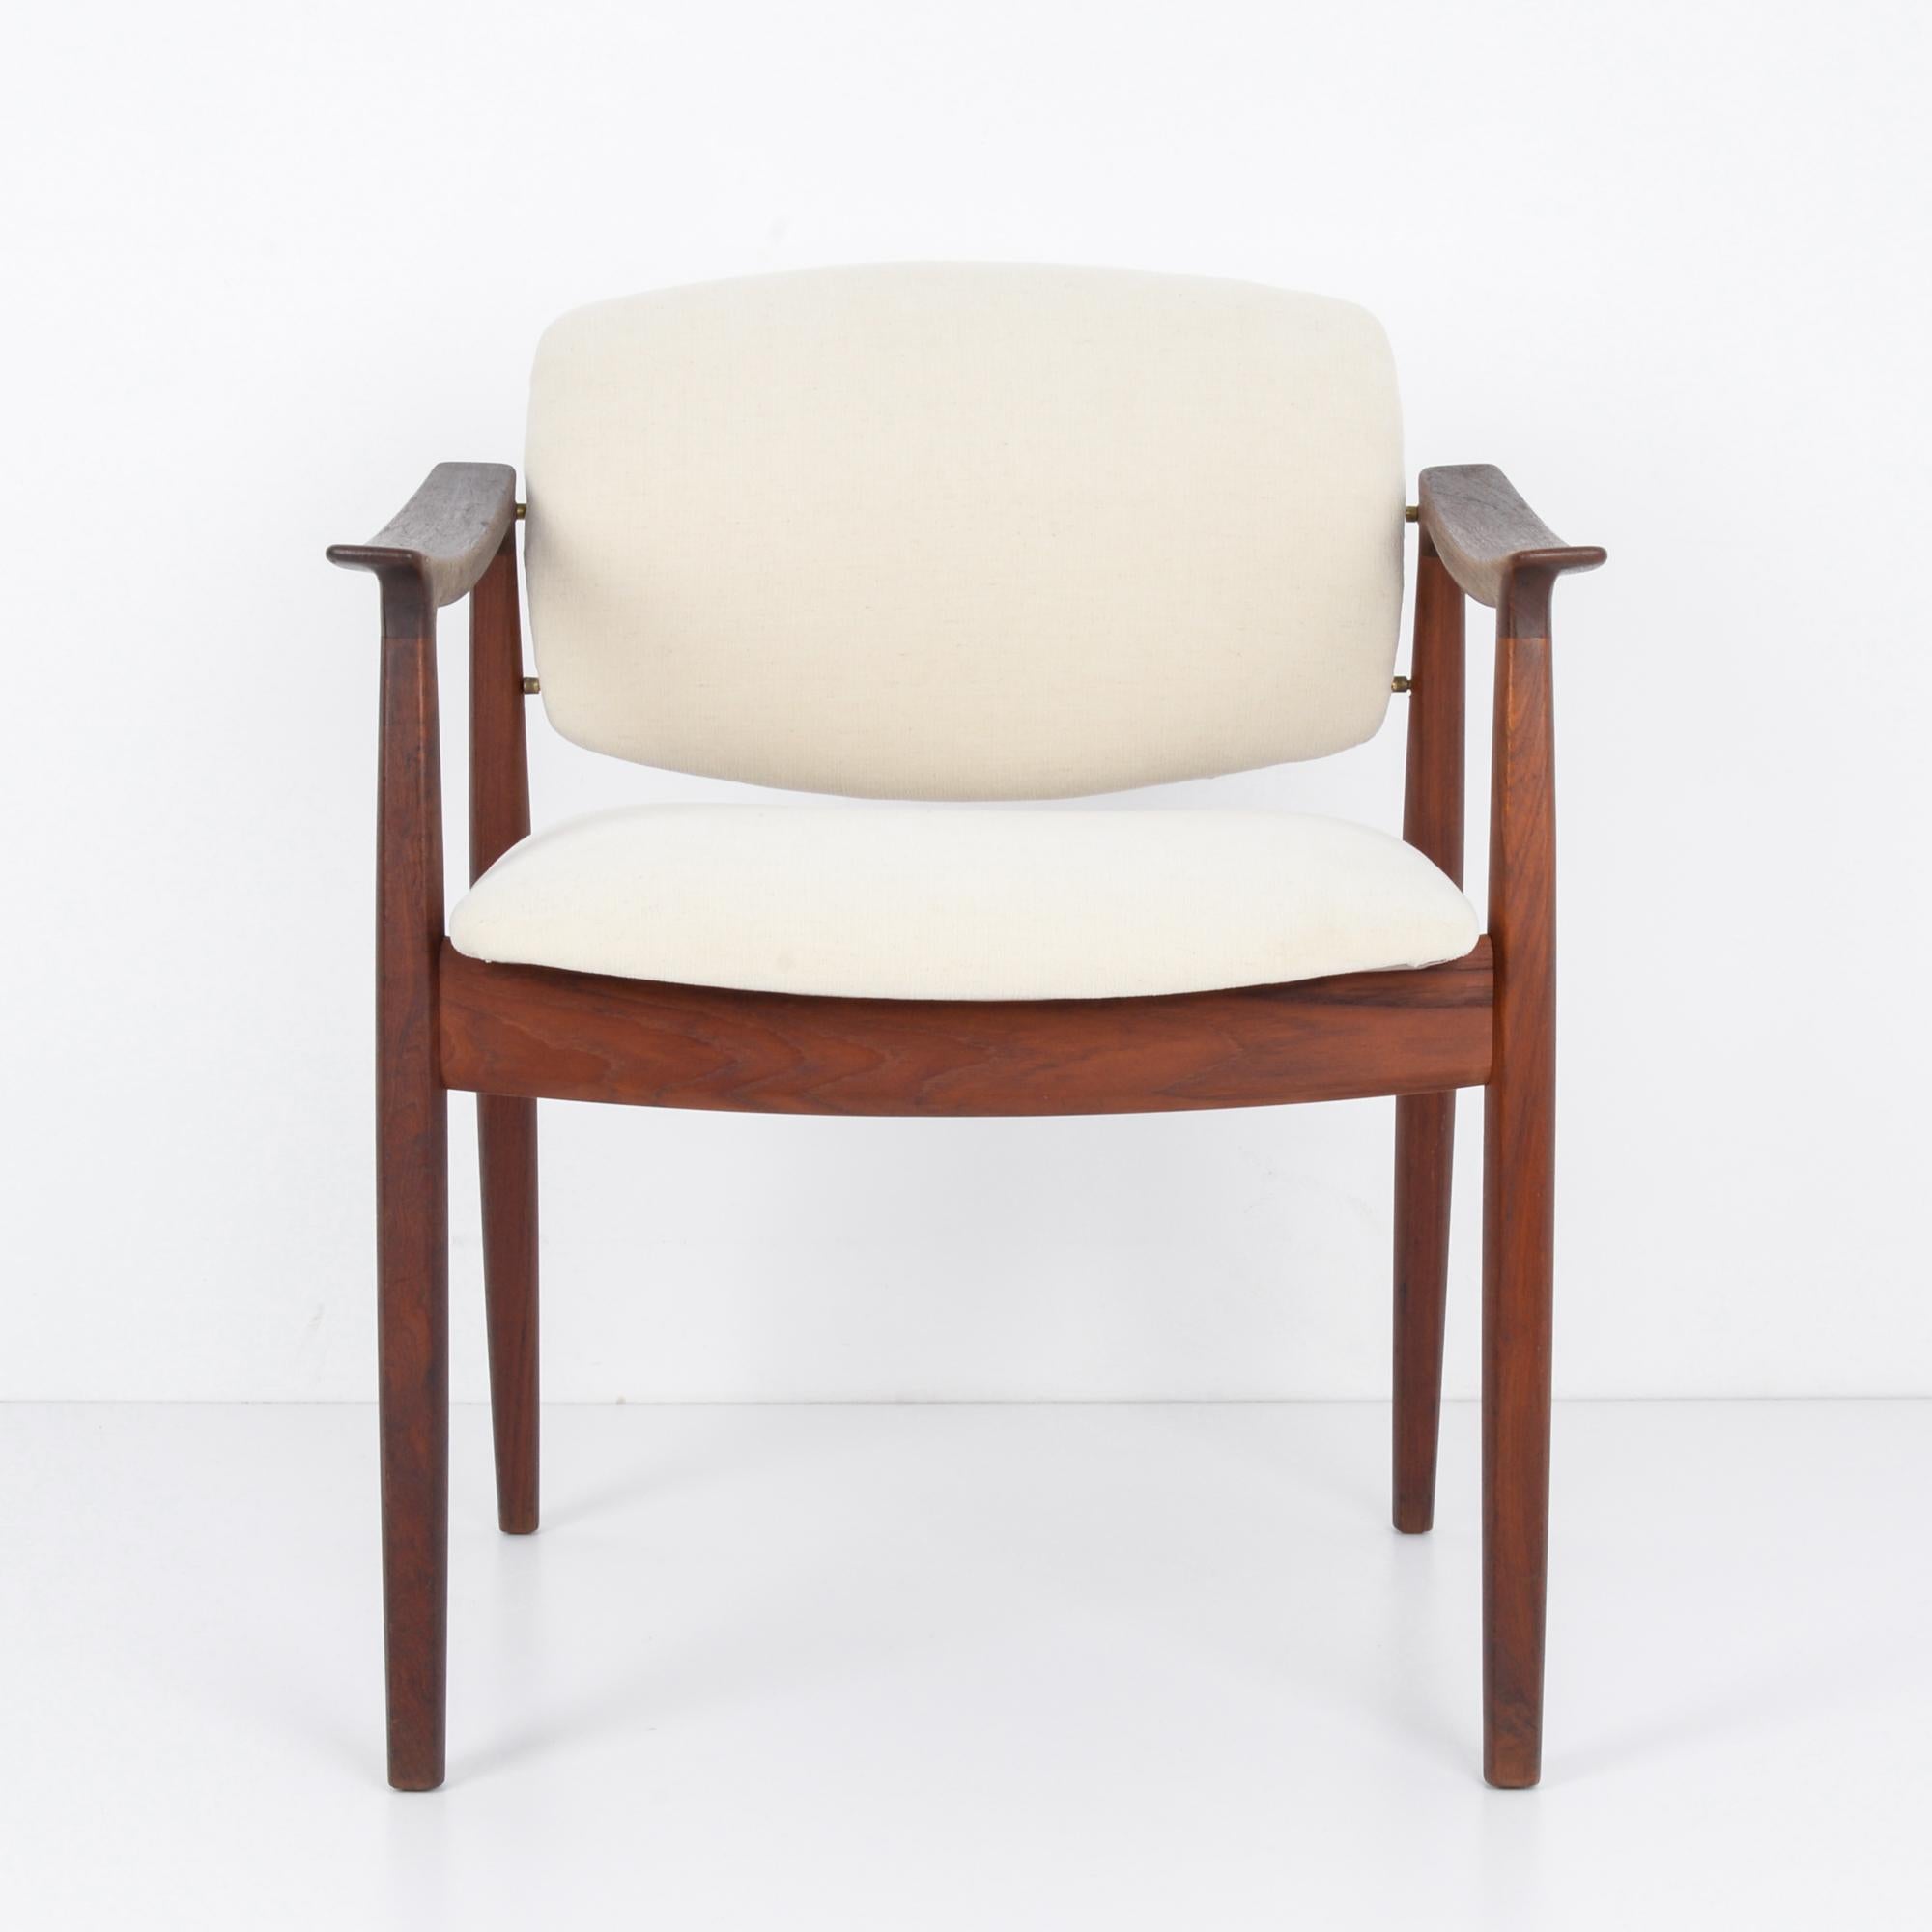 A wooden armchair from Denmark, circa 1960. Dark, mocha-colored wood with a soft polish, and a seat and backrest upholstered in a natural white. The frame is low-set, the back legs are set at an elegant slant, and the slope of the armrests invites a